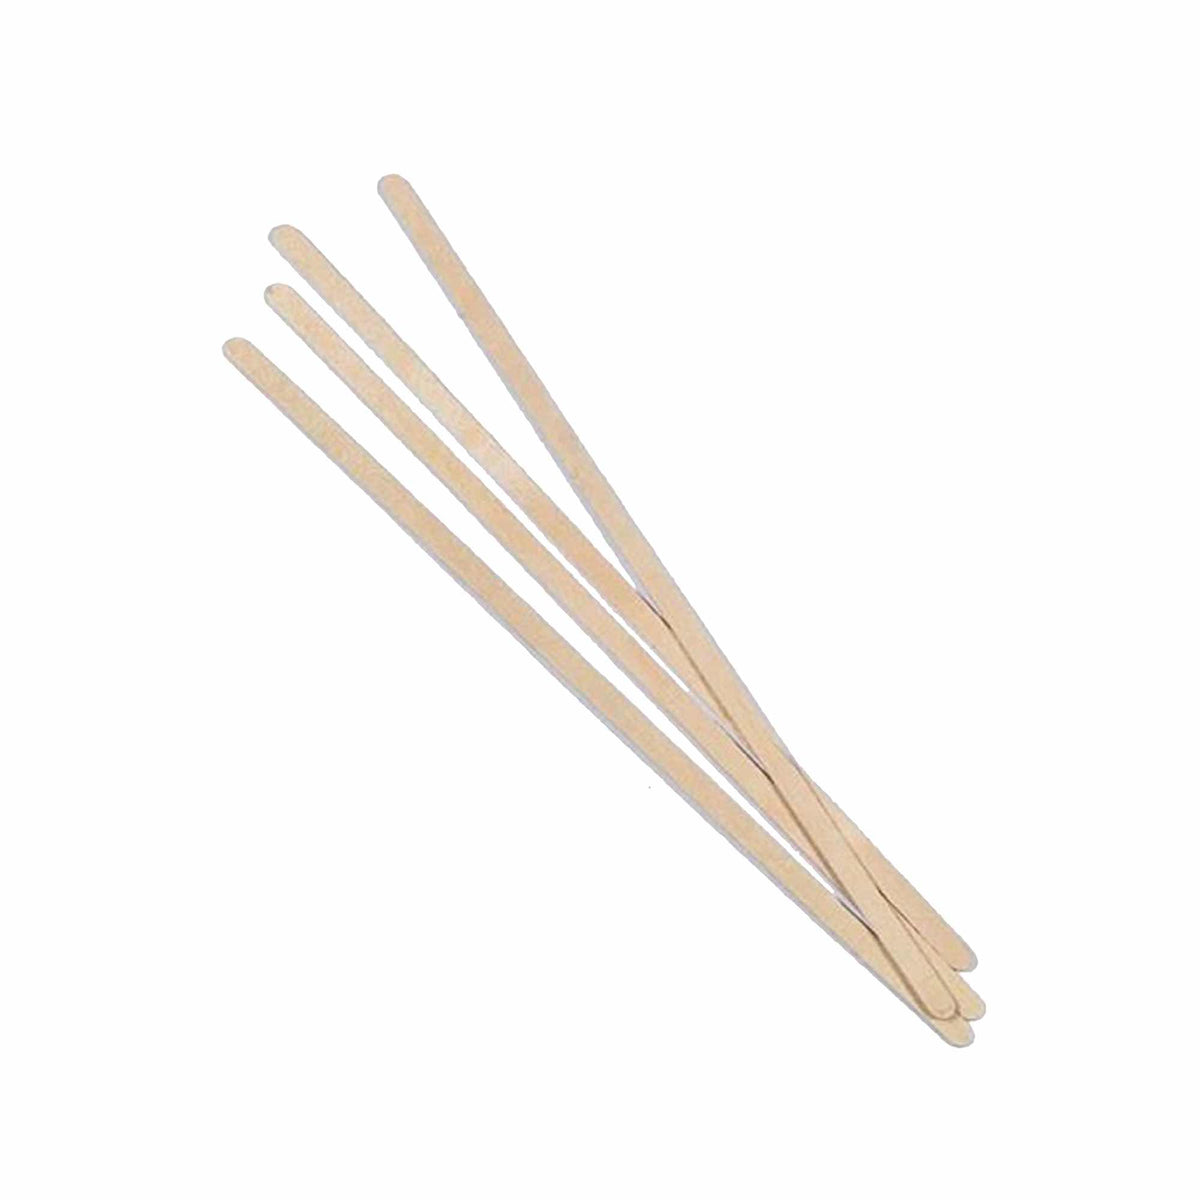 https://www.clumsygoat.shop/wp-content/uploads/1689/30/you-can-purchase-the-best-7-5-inch-wooden-coffee-stirrers-pack-of-500-unbranded-for-sale-at-unbelievable-prices-on-our-site_0.jpg